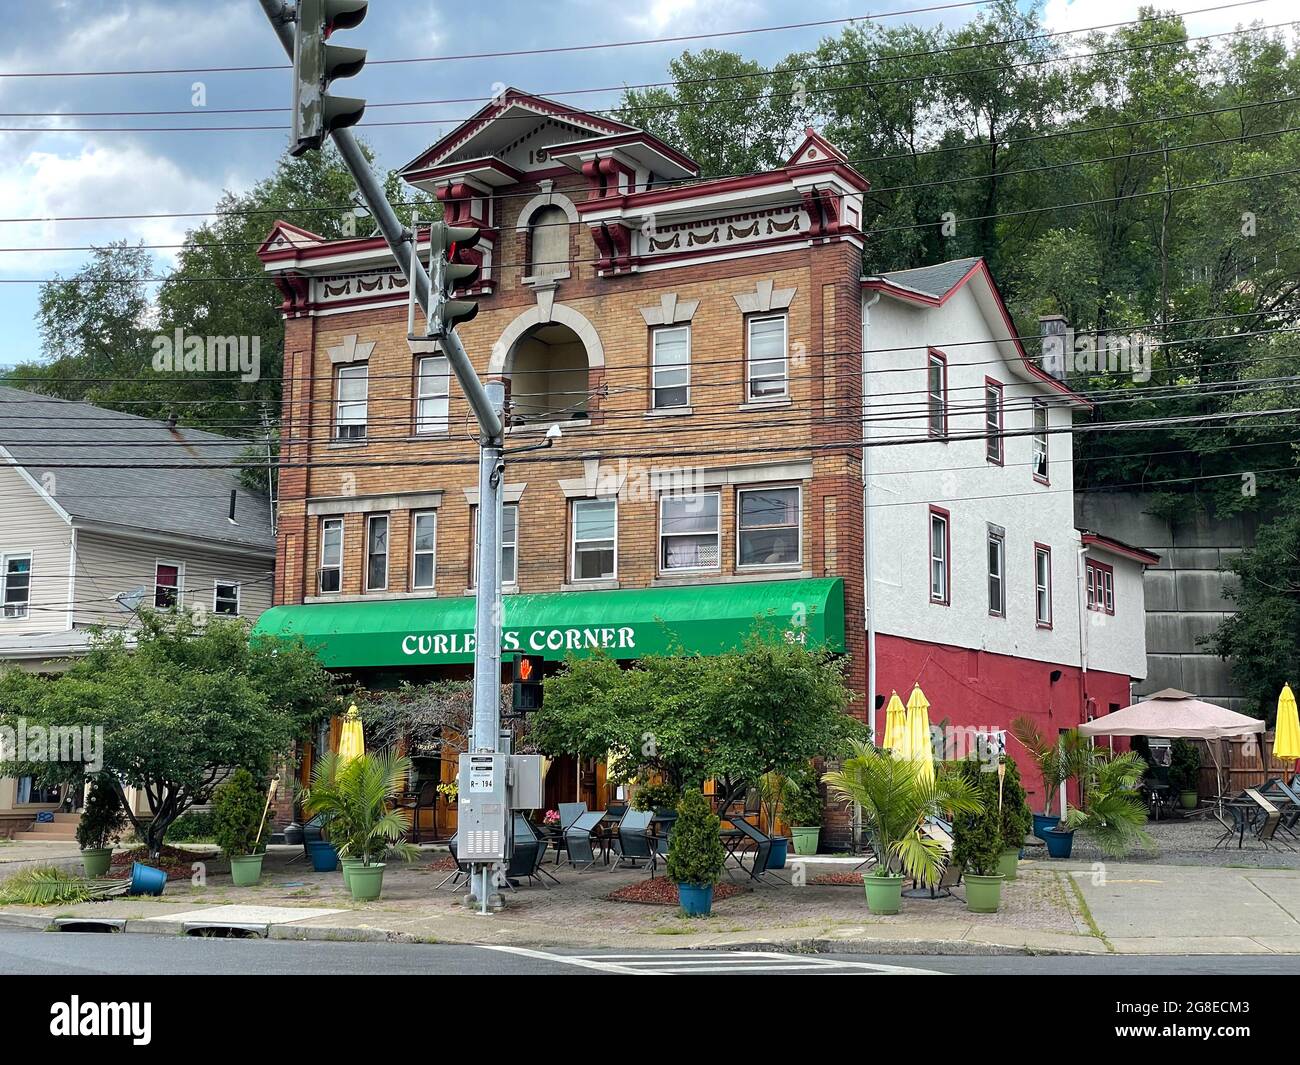 Suffern, NY - USA - July 17, 2021: Horizontal view of one of 